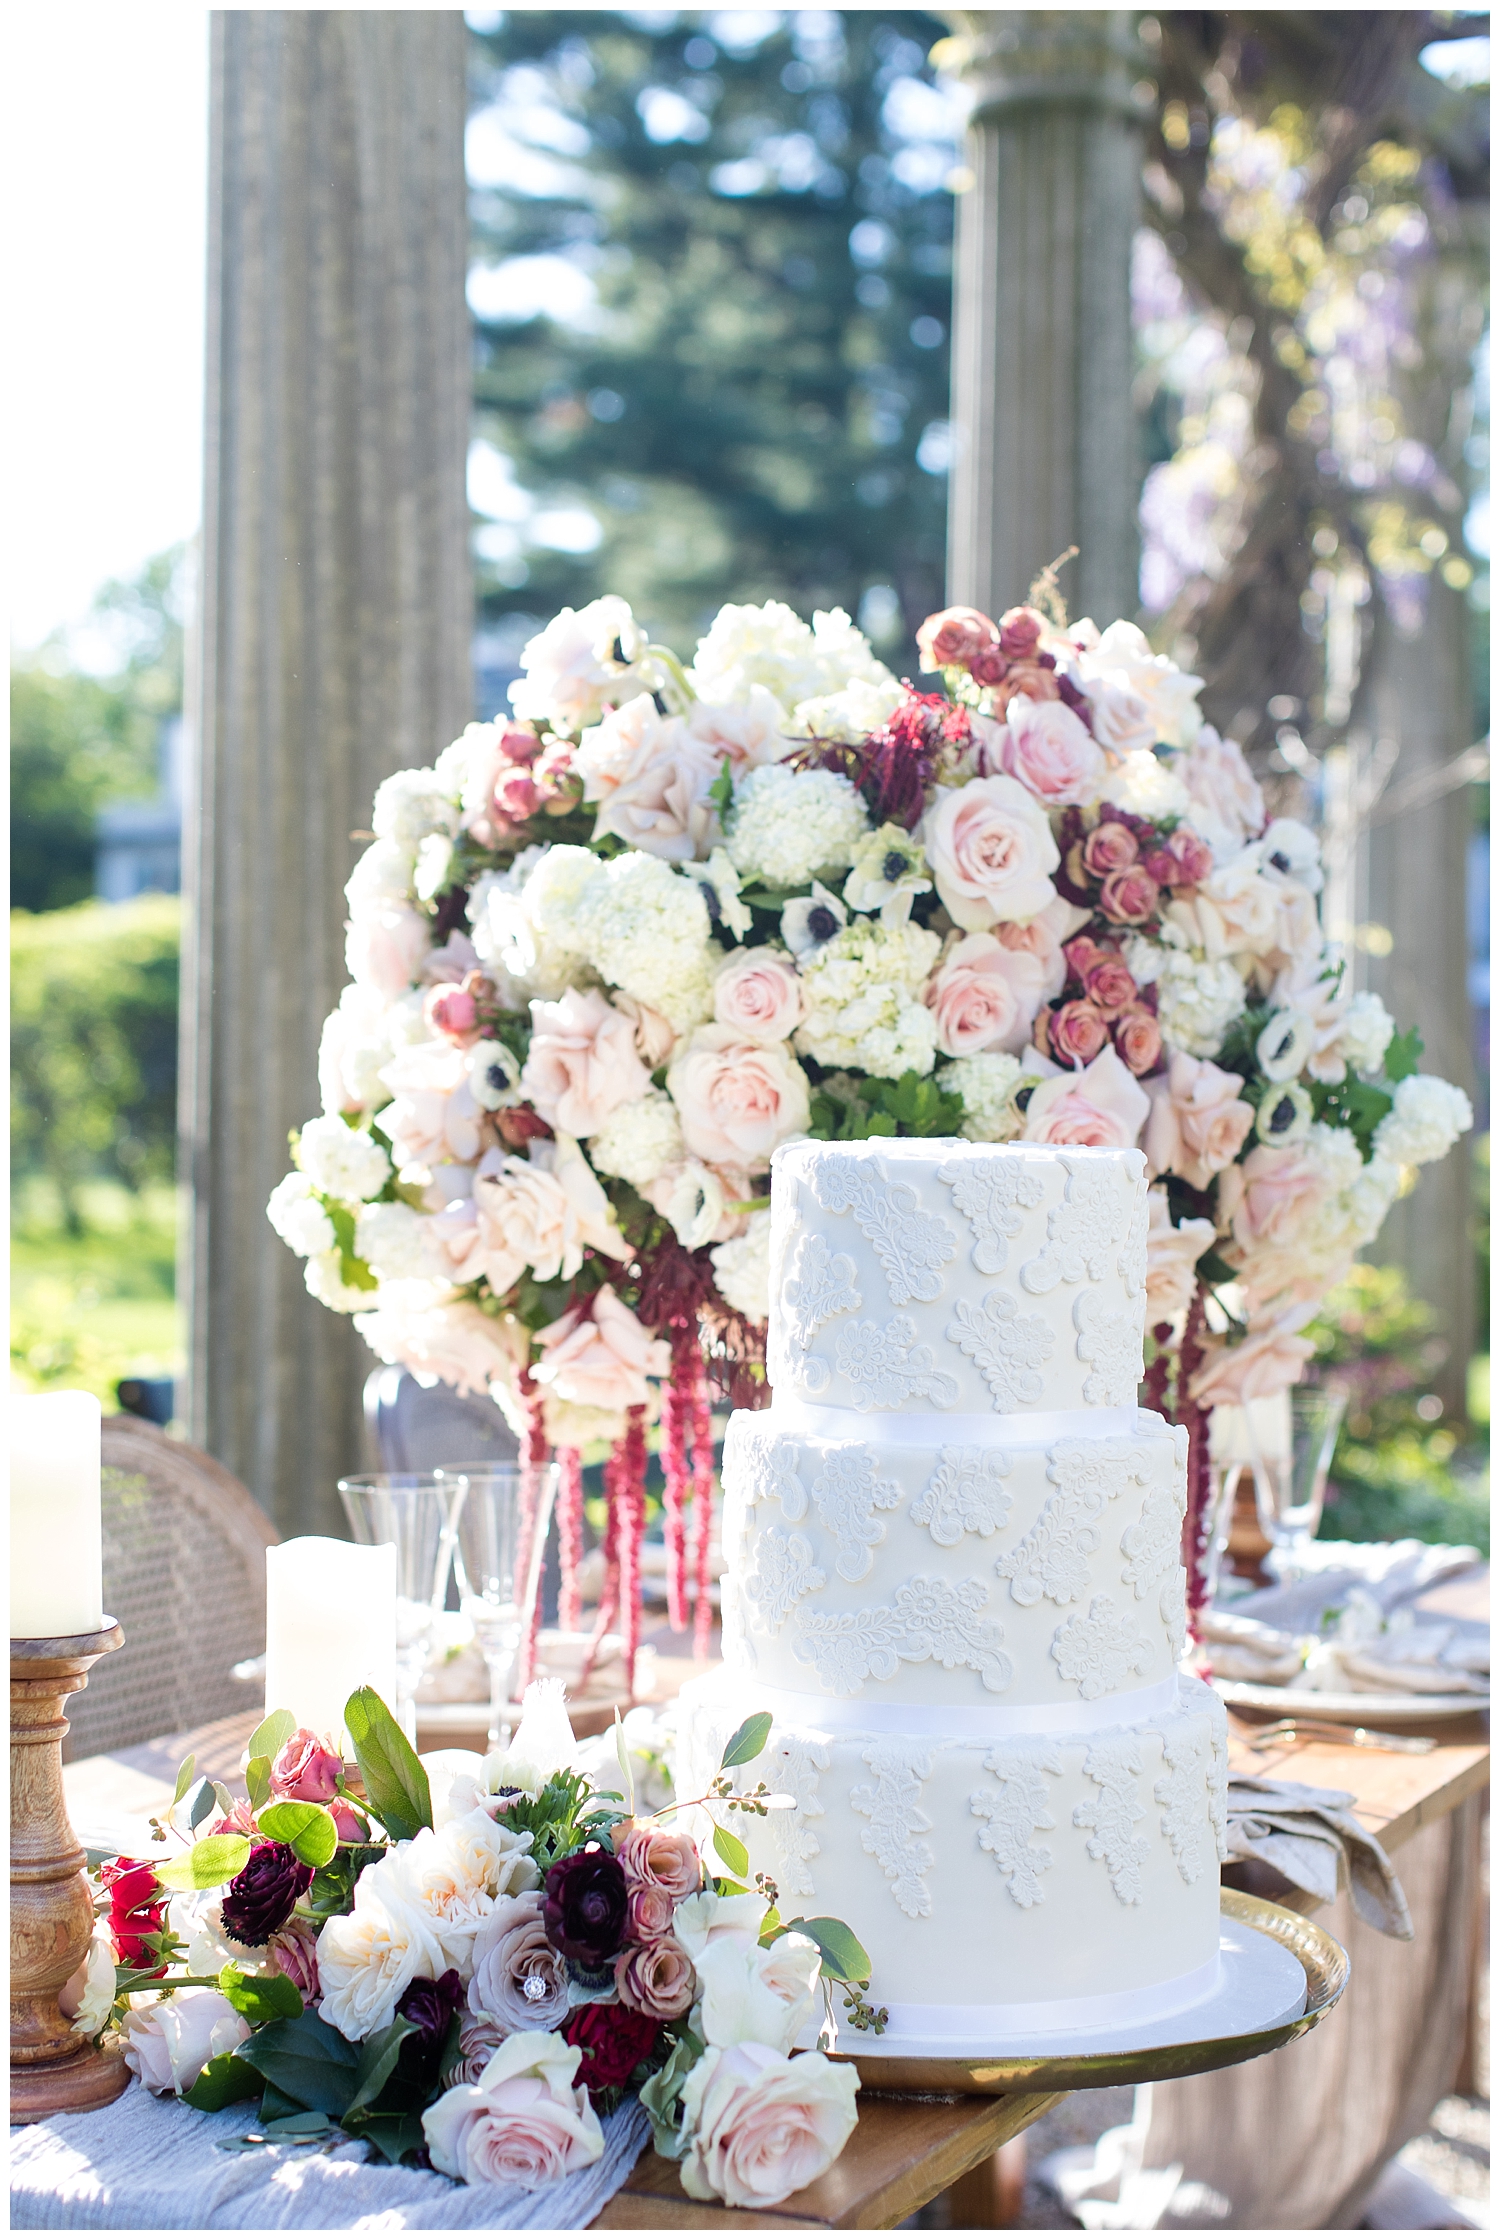 Glen Magna Farms Danvers, Massachusetts wedding inspiration shoot with photography by halie. Rentlas from PEAK Events and florals by Intrigue Designs. Cake by Cakes for Occasions.